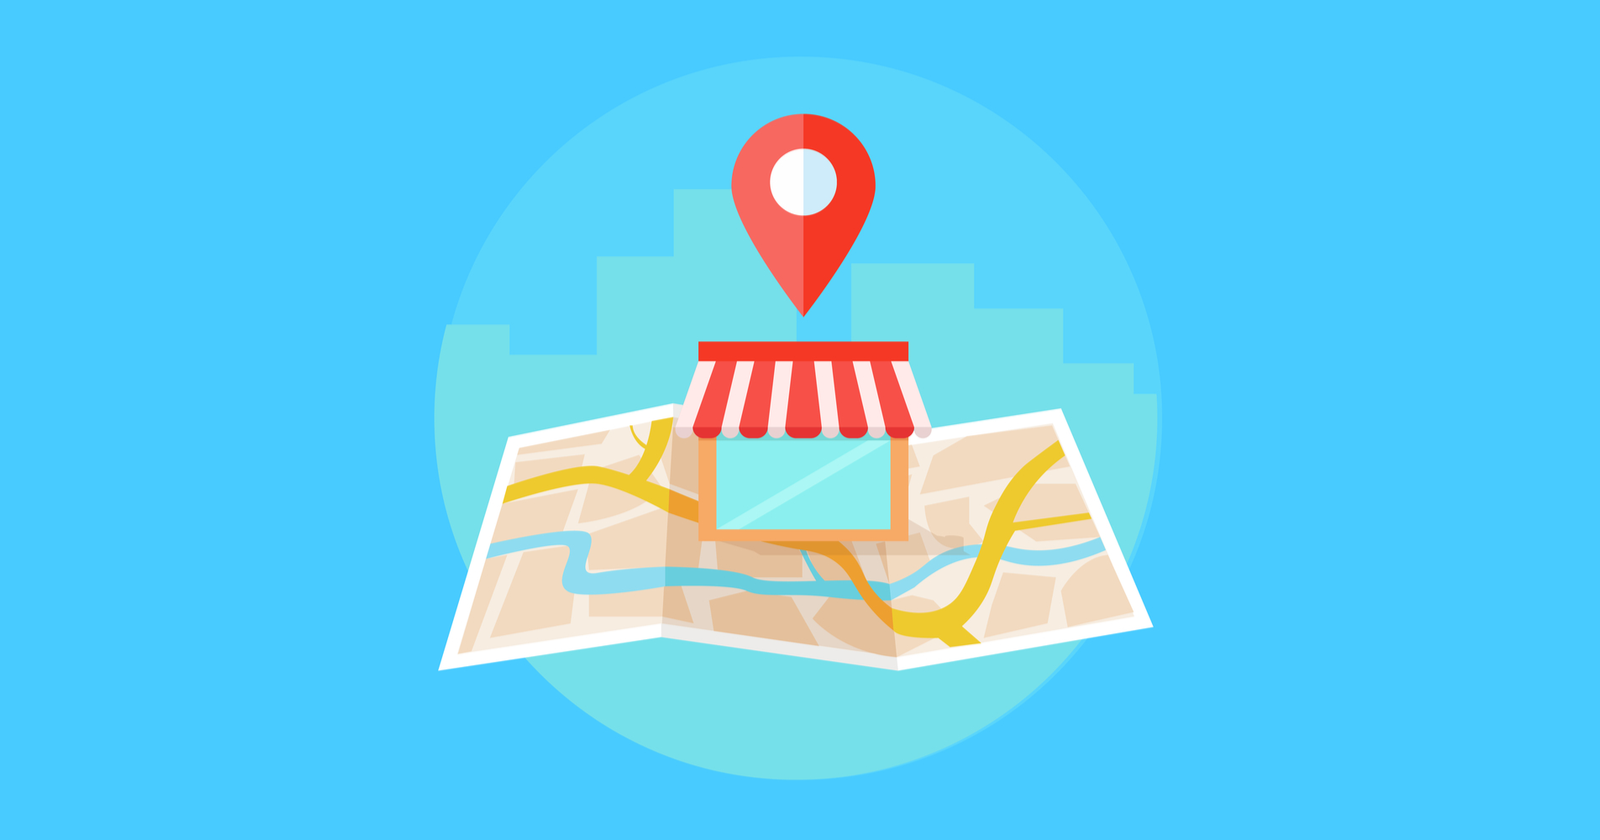 4 Local SEO Tips Even the Experts Miss